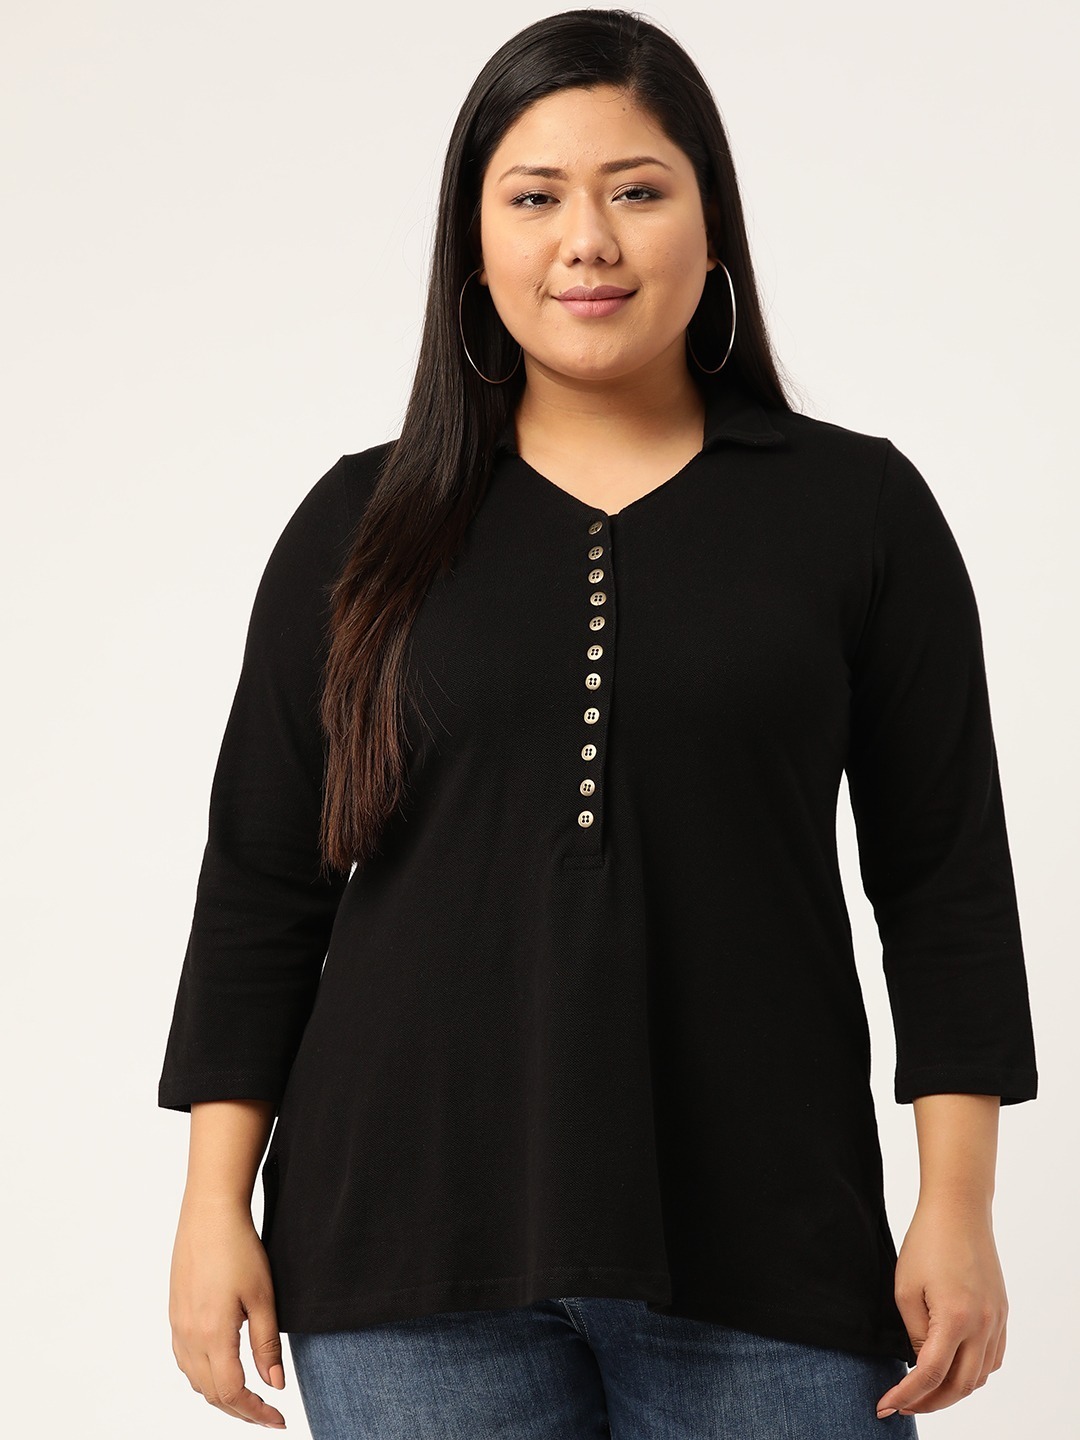 Plus Size Clothing Store, Buy Women XL To 6XL Clothing Online